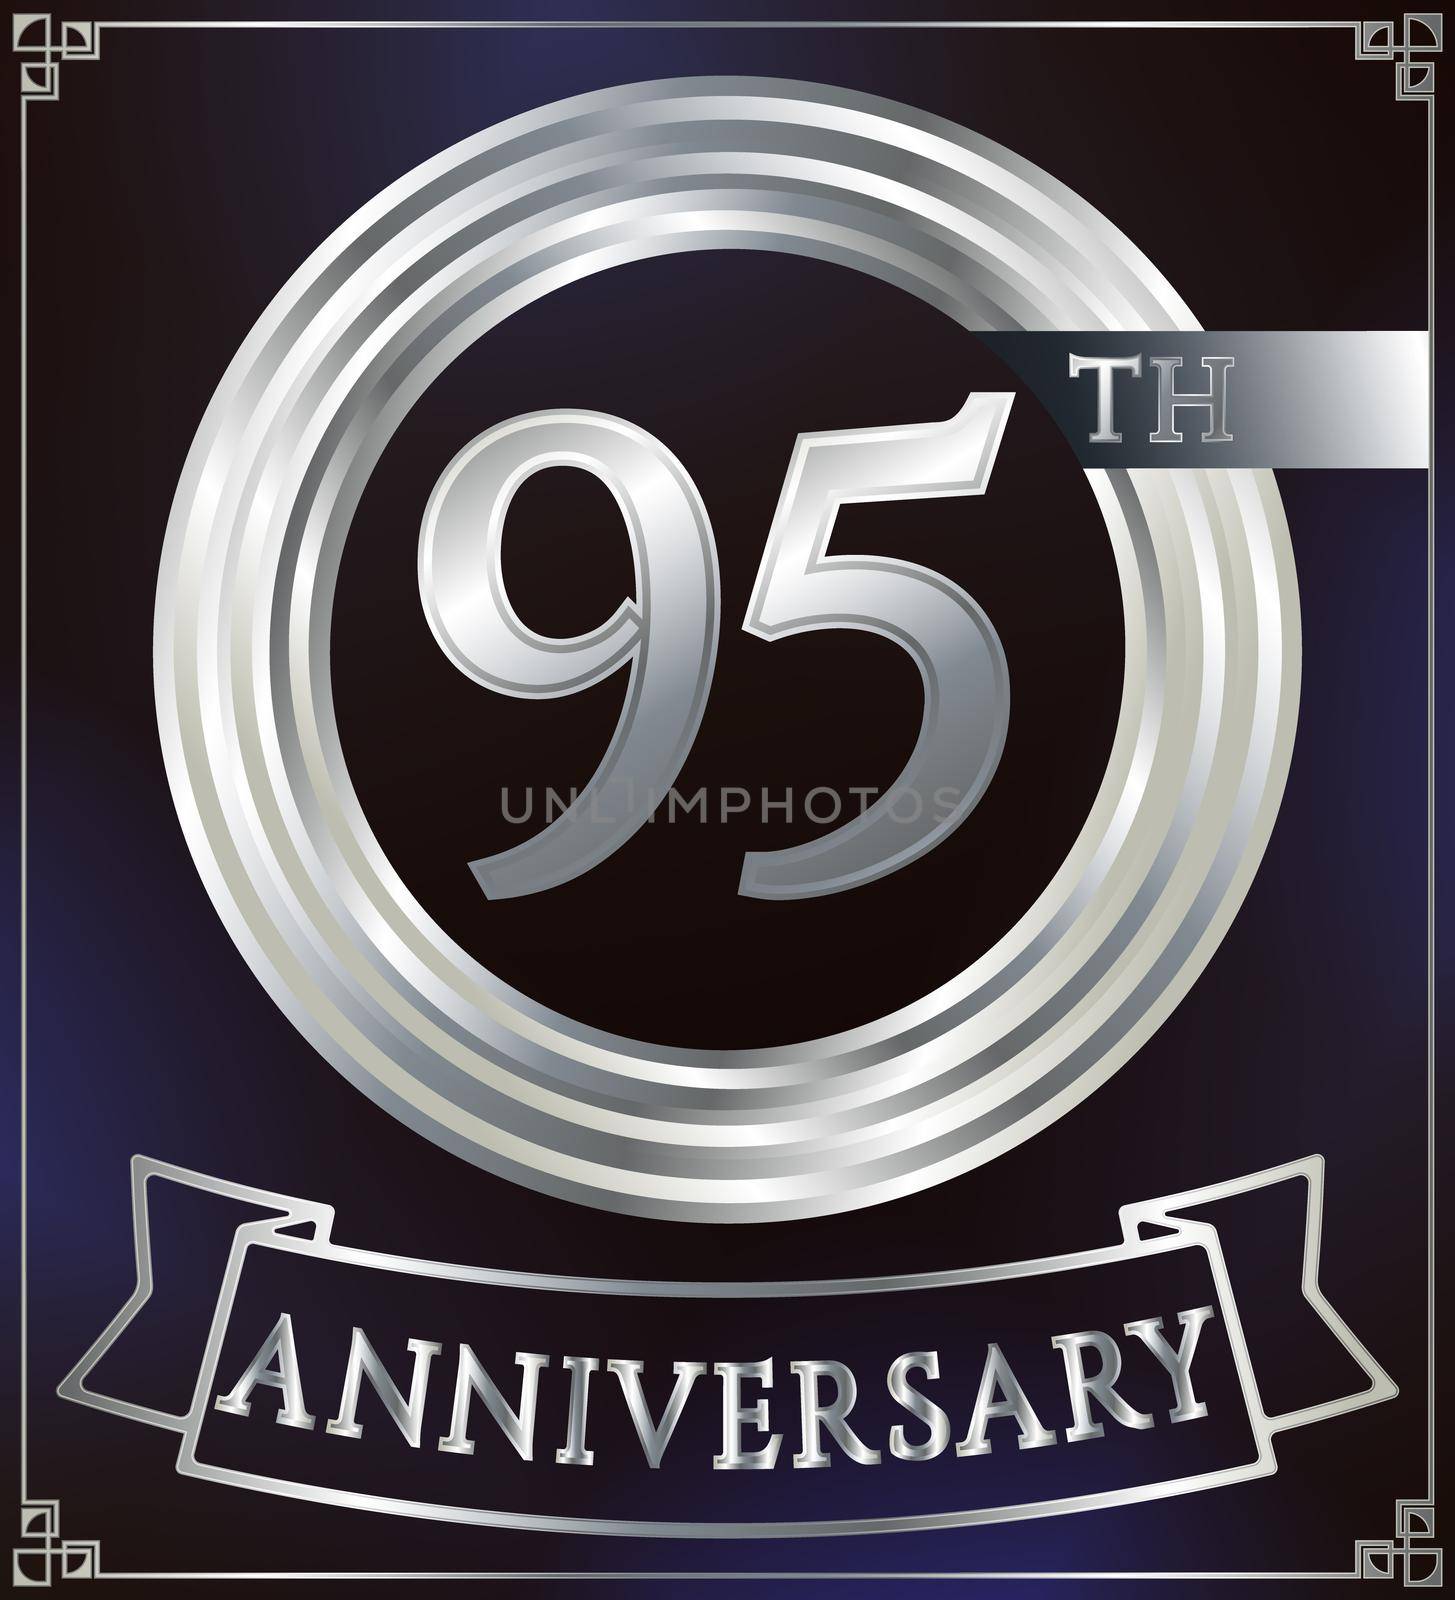 Anniversary silver ring logo number 95. Anniversary card with ribbon. Blue background. Vector illustration.